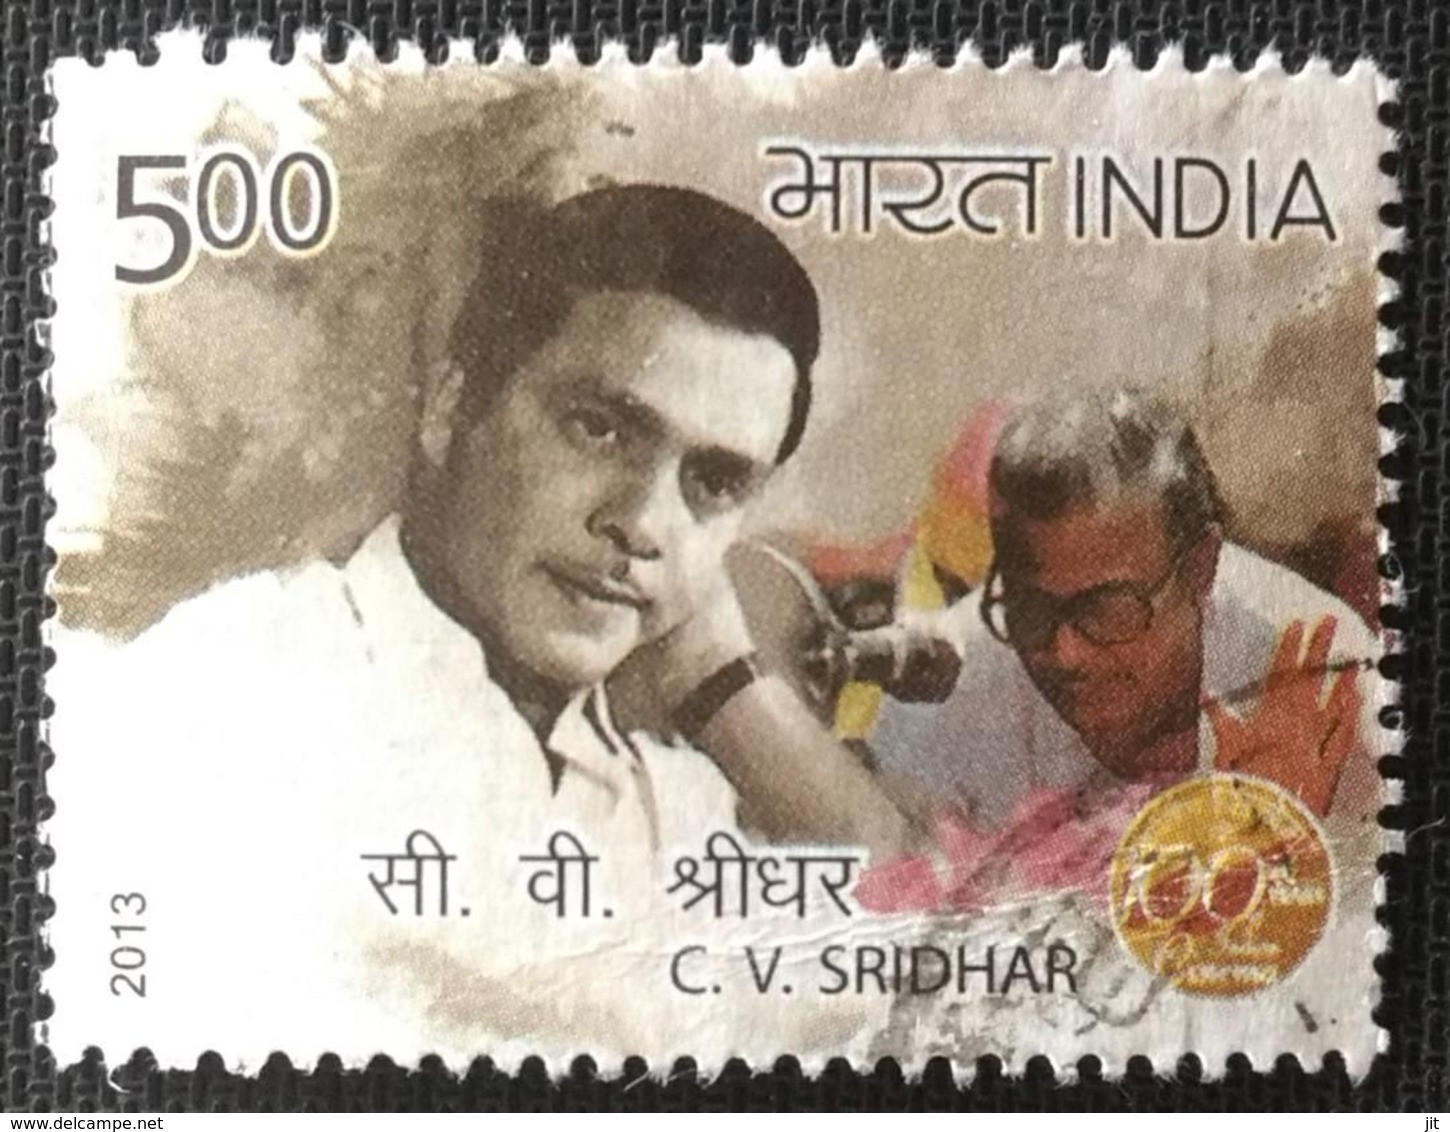 INDIA 2013 USED STAMP 100 YEARS OF INDIAN CINEMA (C.V.SRIDHAR) - Used Stamps